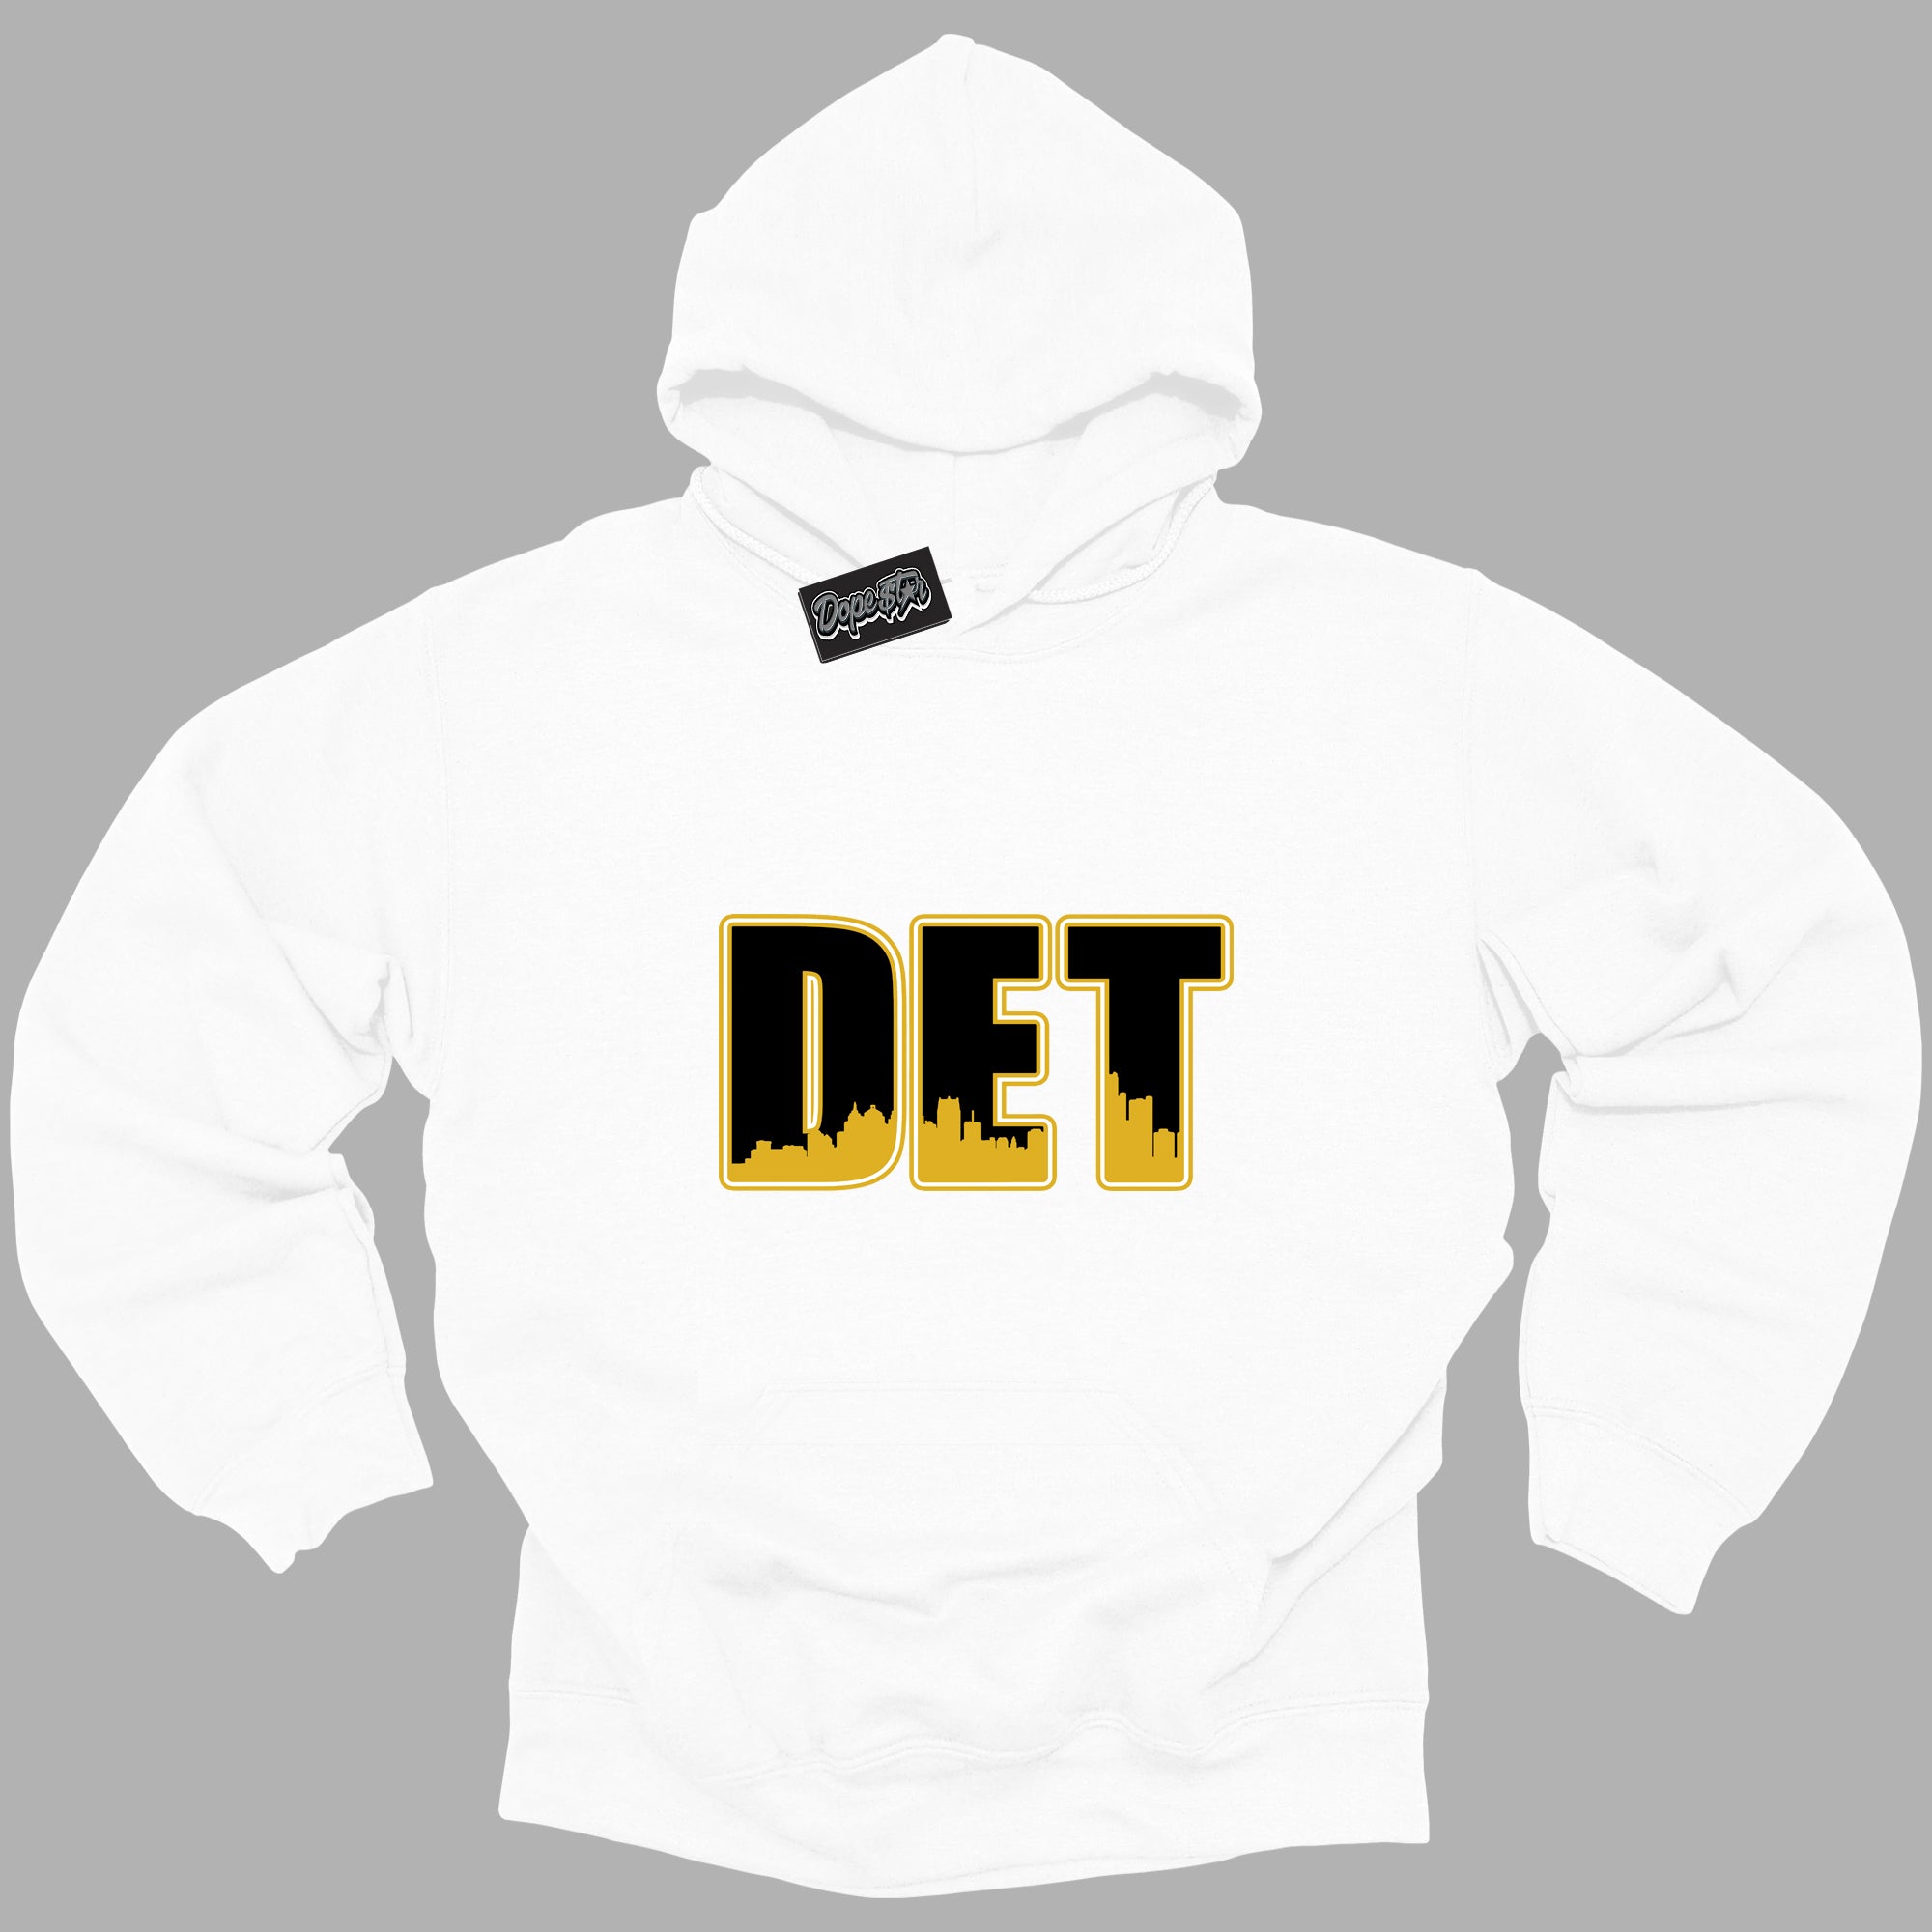 Cool White Hoodie with “ Detroit ”  design that Perfectly Matches Yellow Ochre 6s Sneakers.